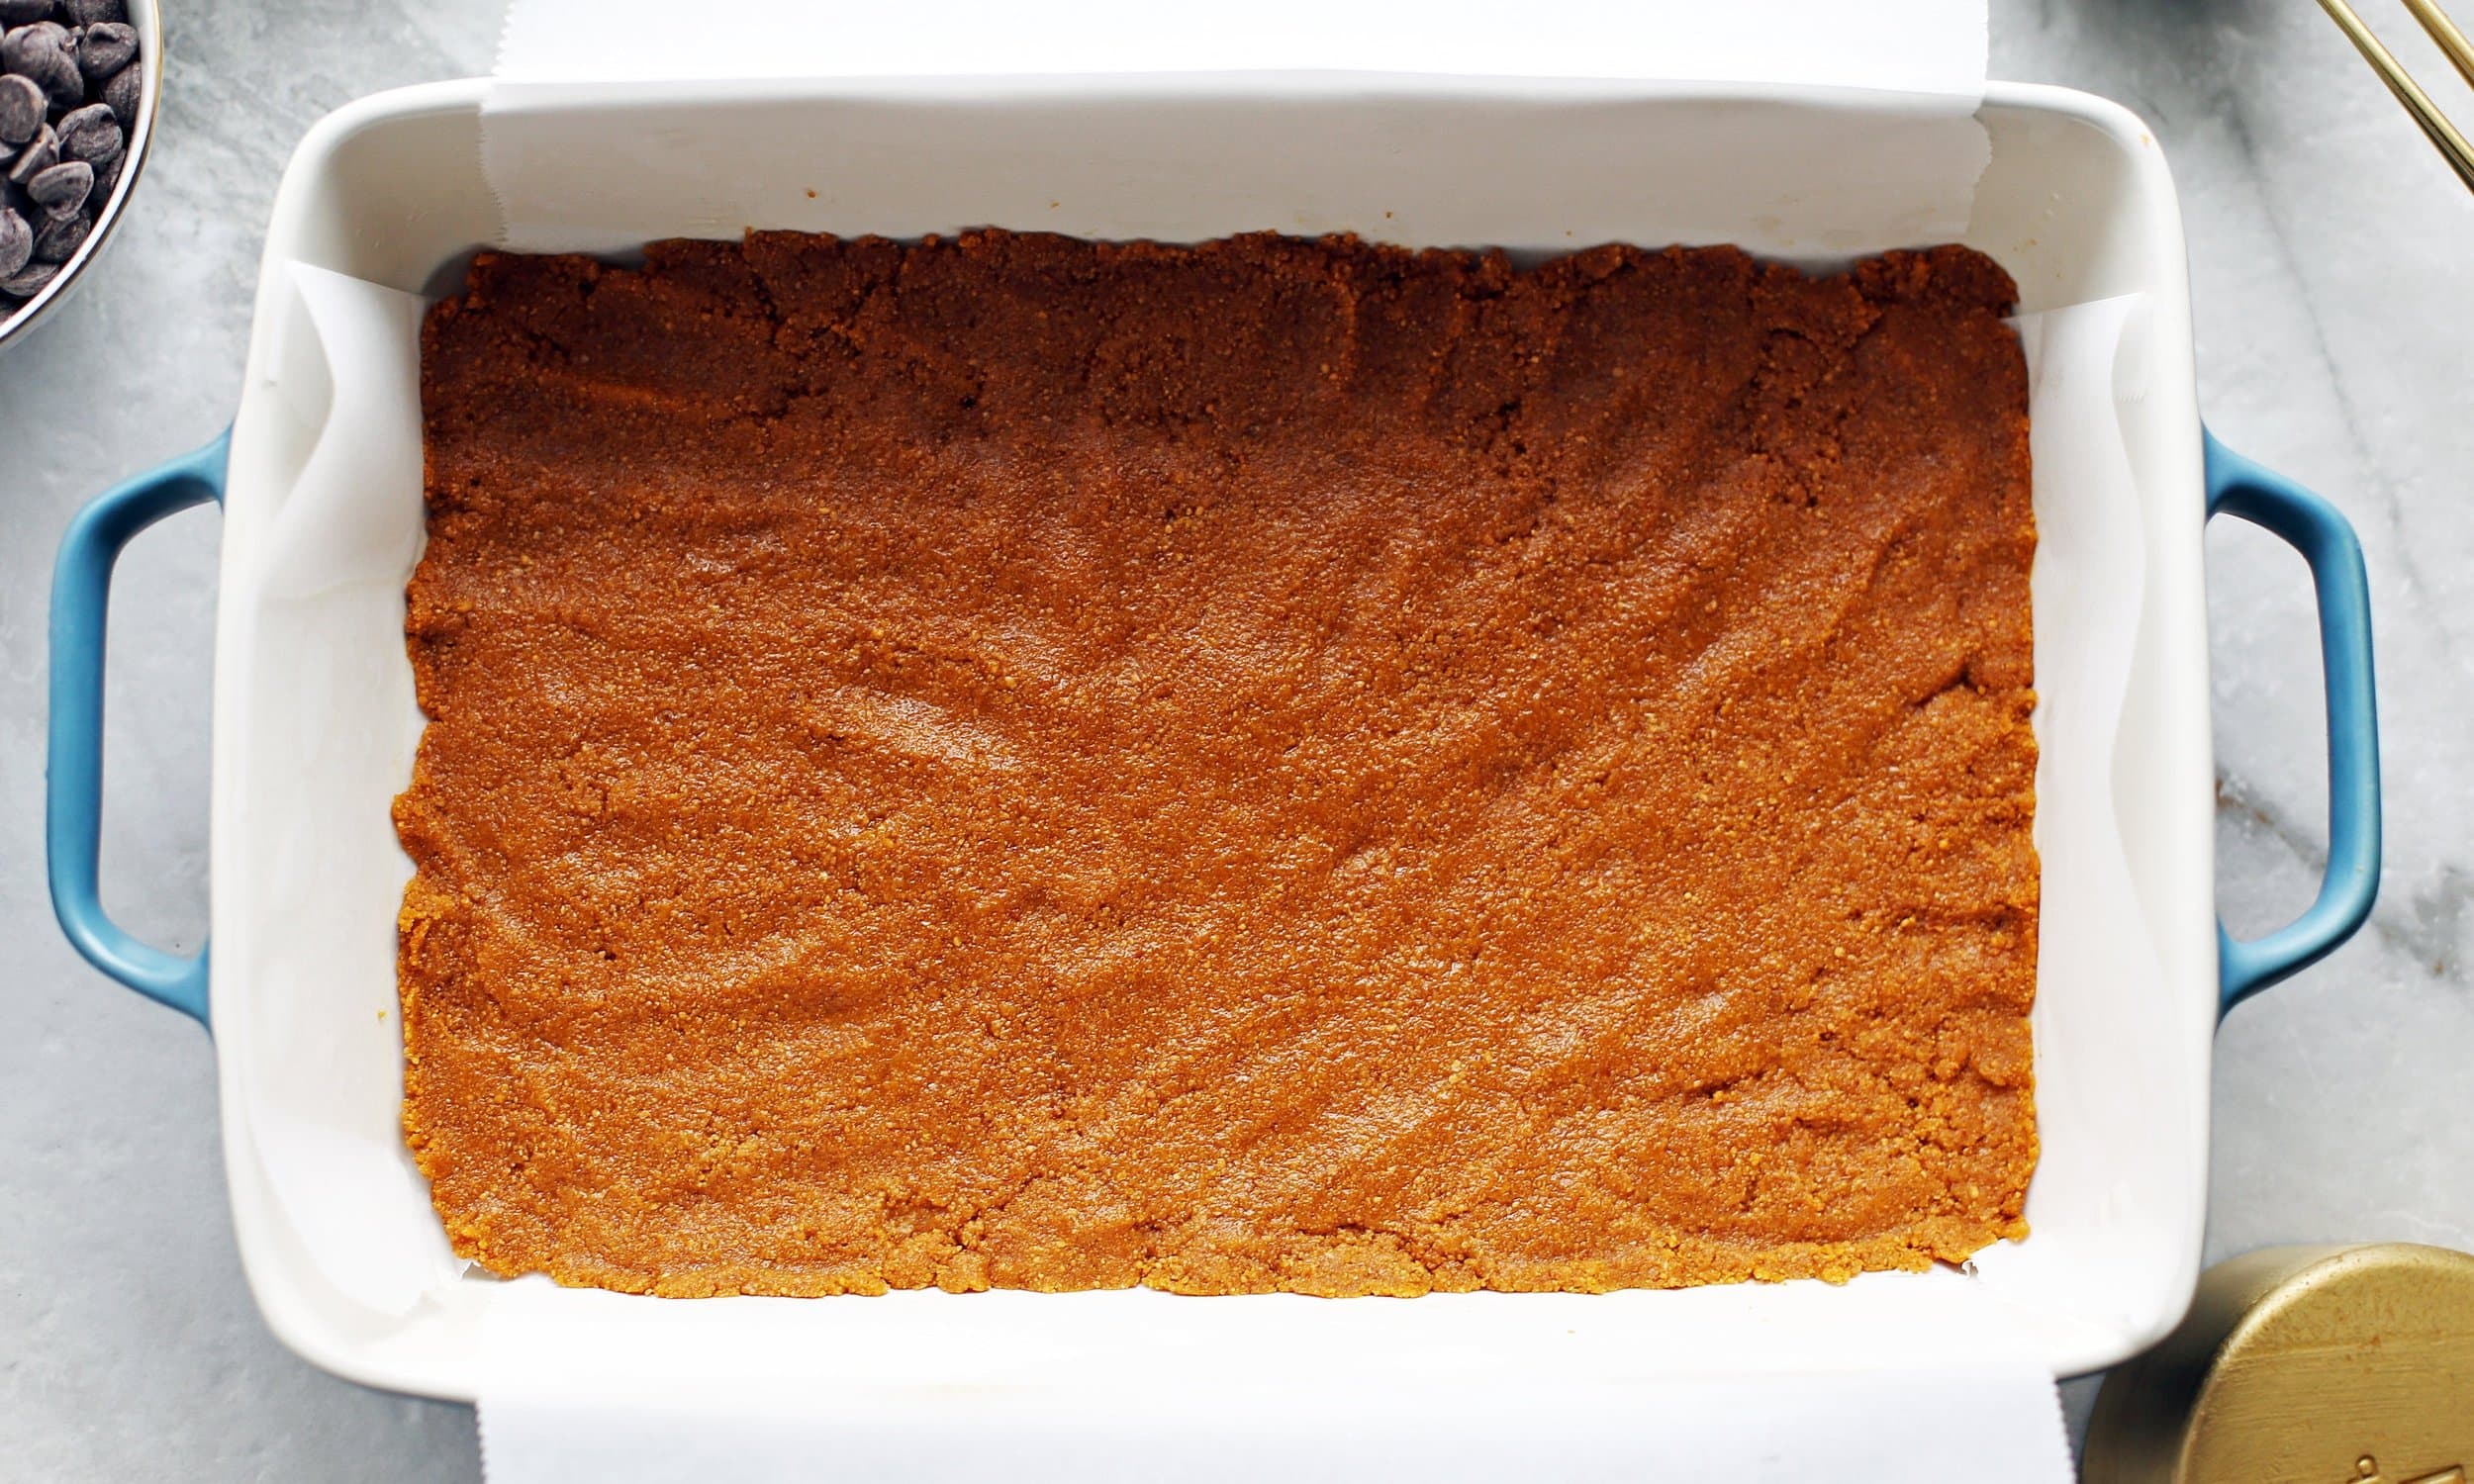 Combined graham cracker crumbs and melted butter pressed into an even layer into a baking dish lined with parchment paper.